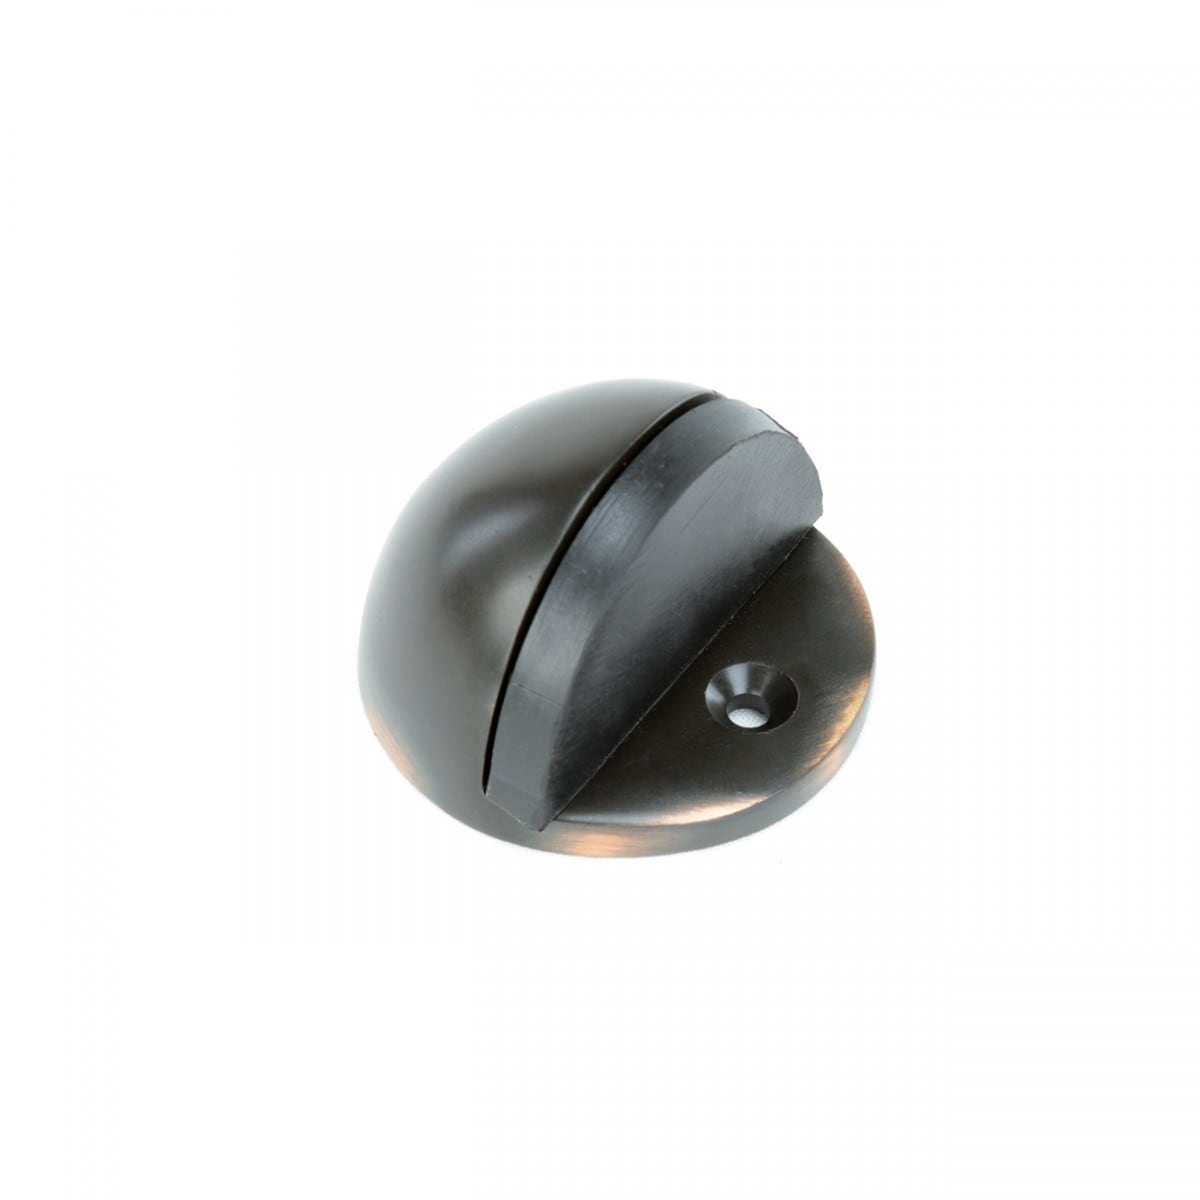 High Rise Dome Stop Oil-Rubbed Bronze 1 1/4" High 